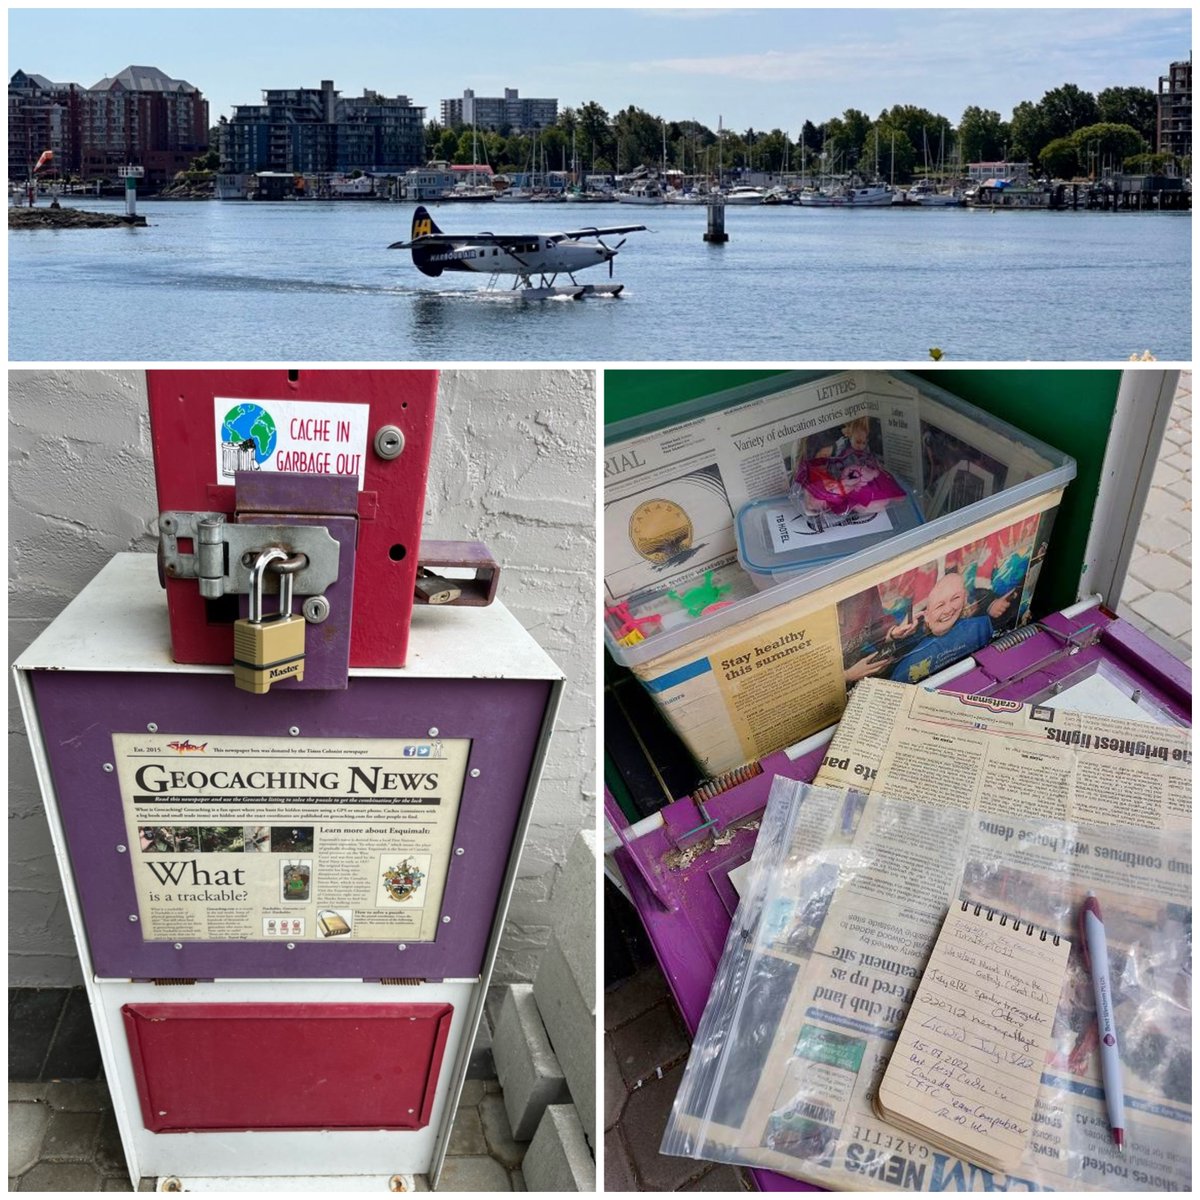 💚 Geocache of the Week 💚 🗞️ Extra! Extra! Read all about it! 🗞️ Breaking news out of British Columbia, #Canada—local geocache (GC5Z4N2) reaches 440 Favorite points! 🔗bit.ly/3VBWRtU 🔗 Have you found a newsworthy geocache recently? 👀 #geocaching